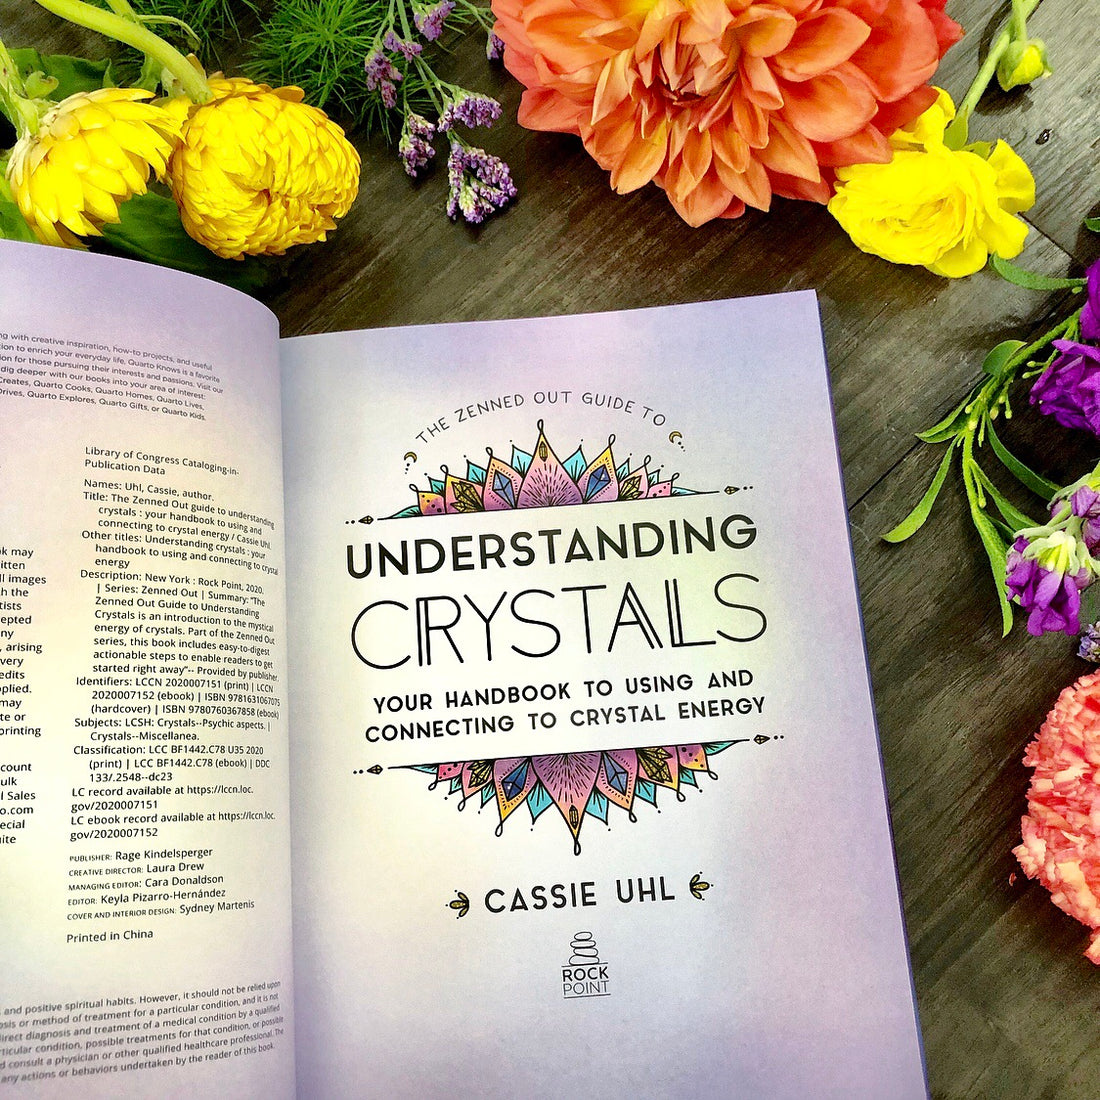 The Zenned Out Guide to Understanding Crystals